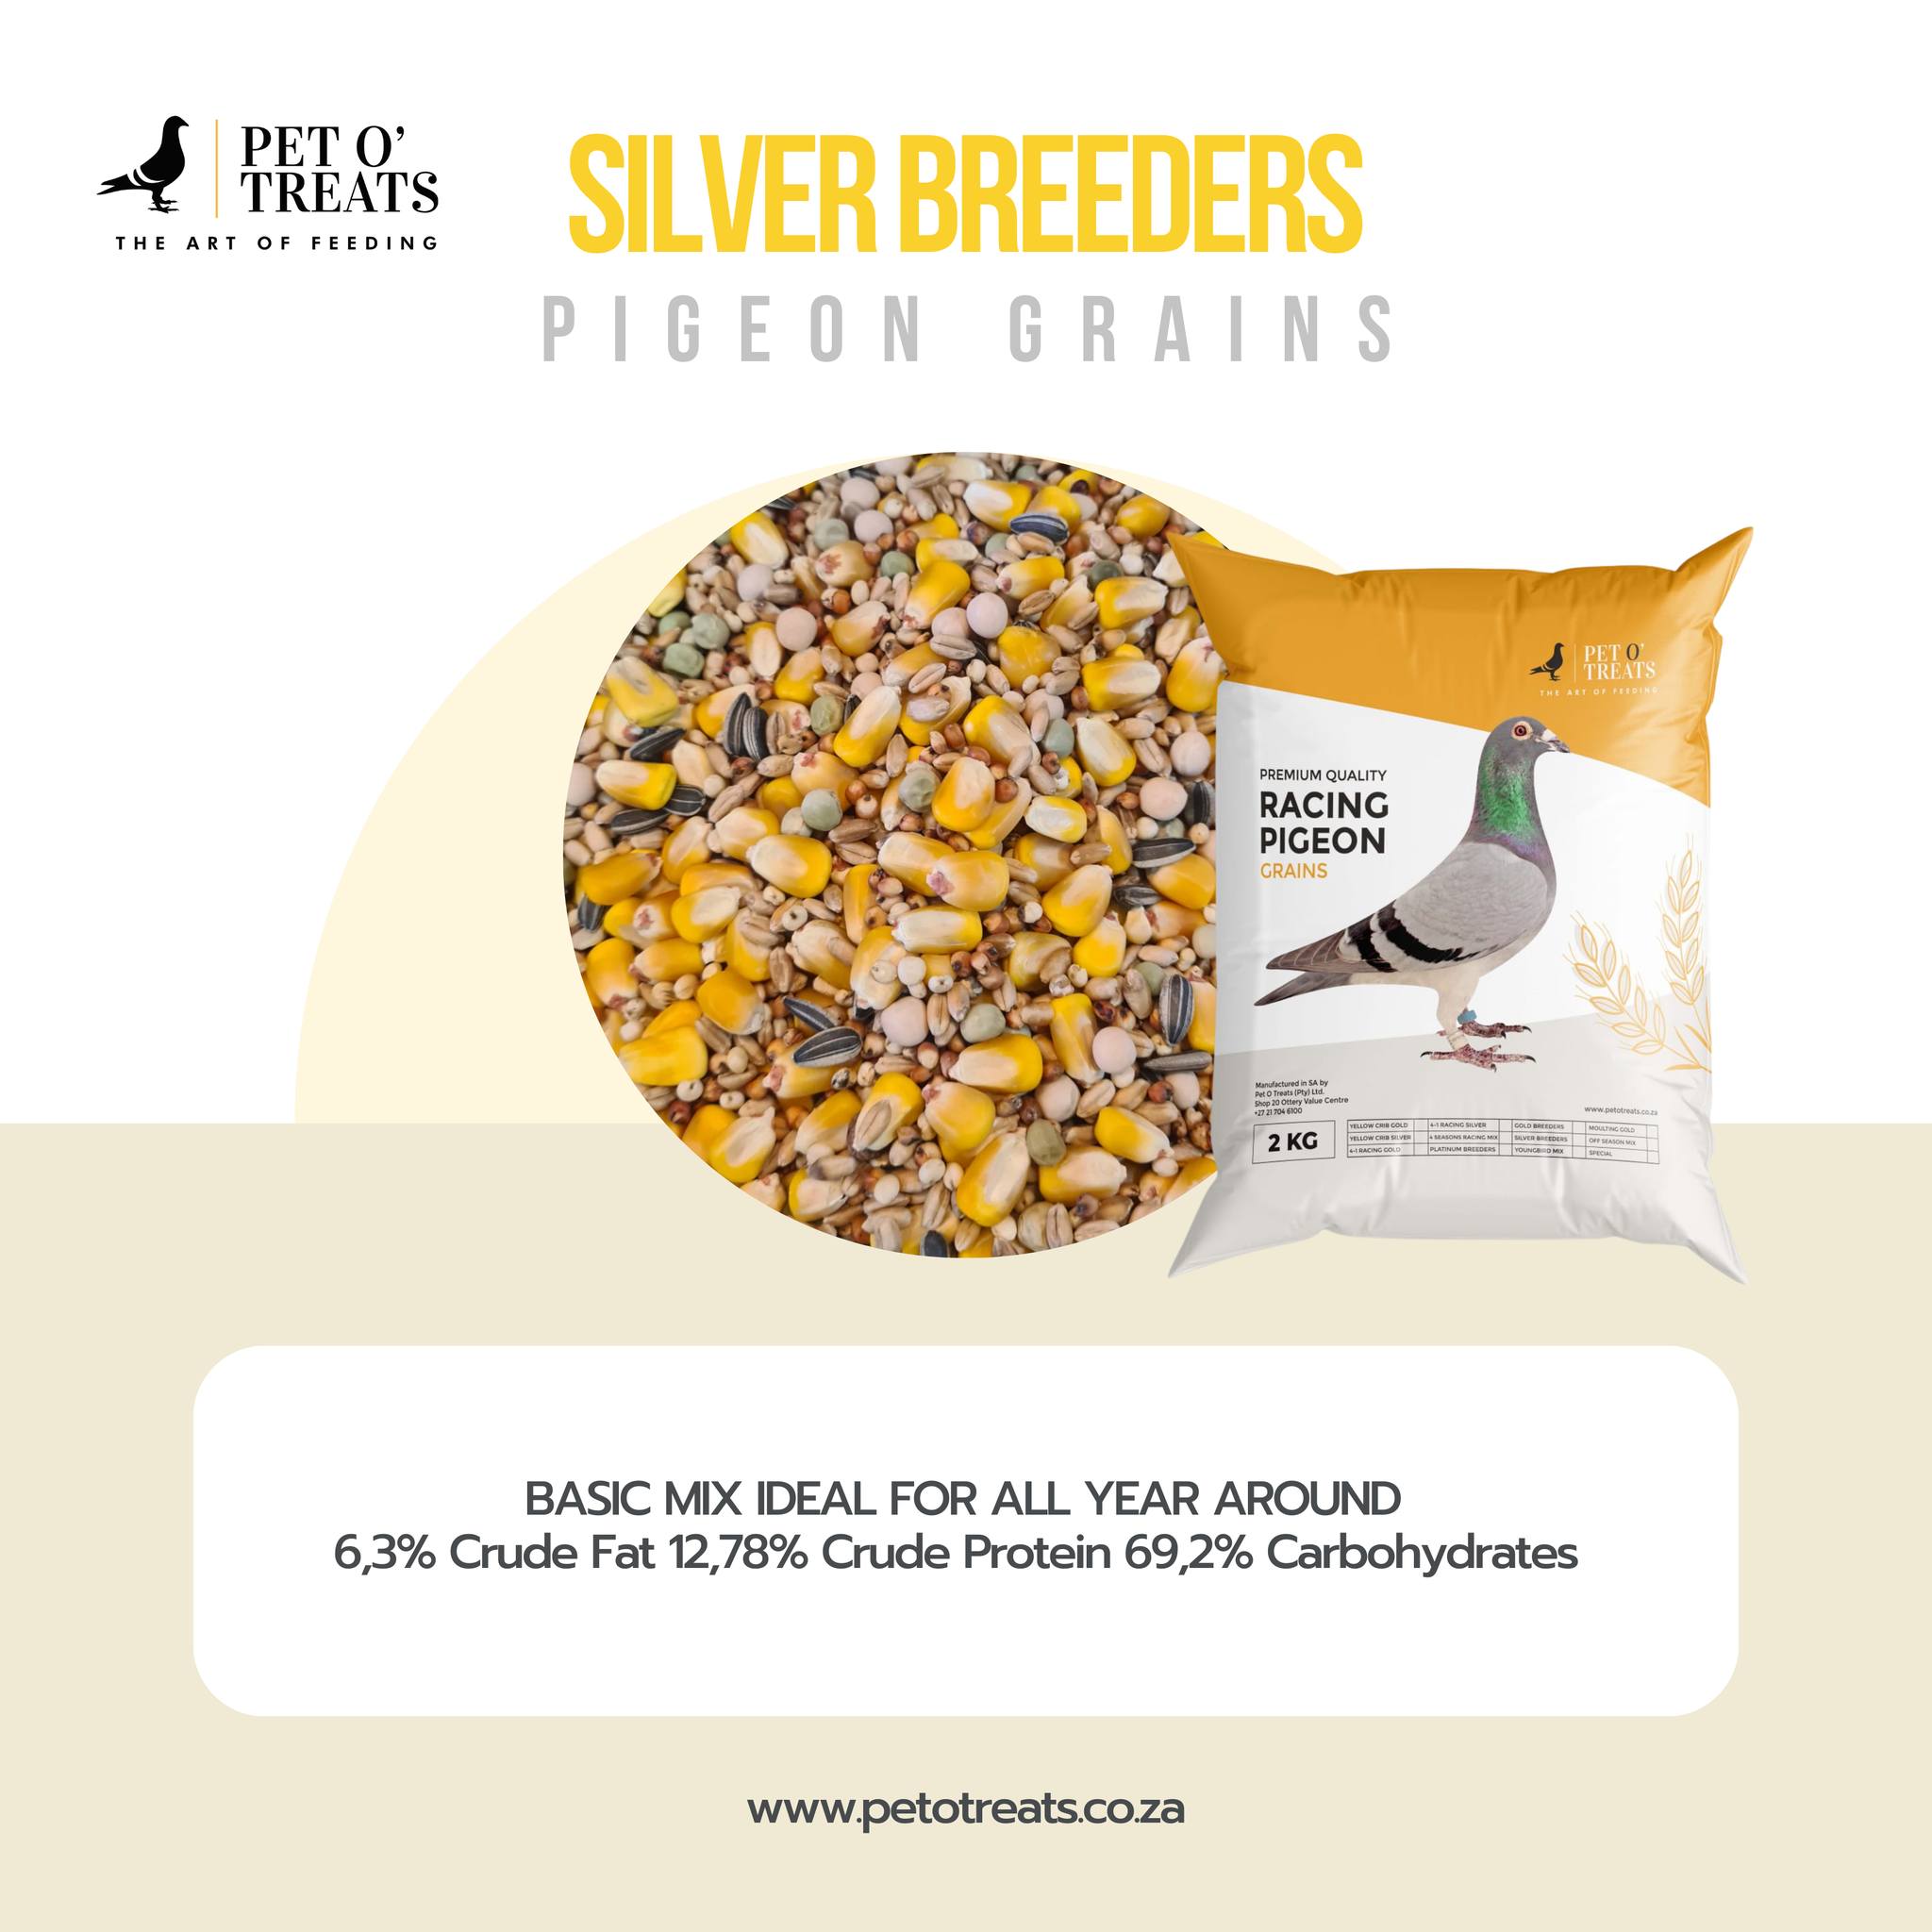 SILVER - BREEDERS MIX